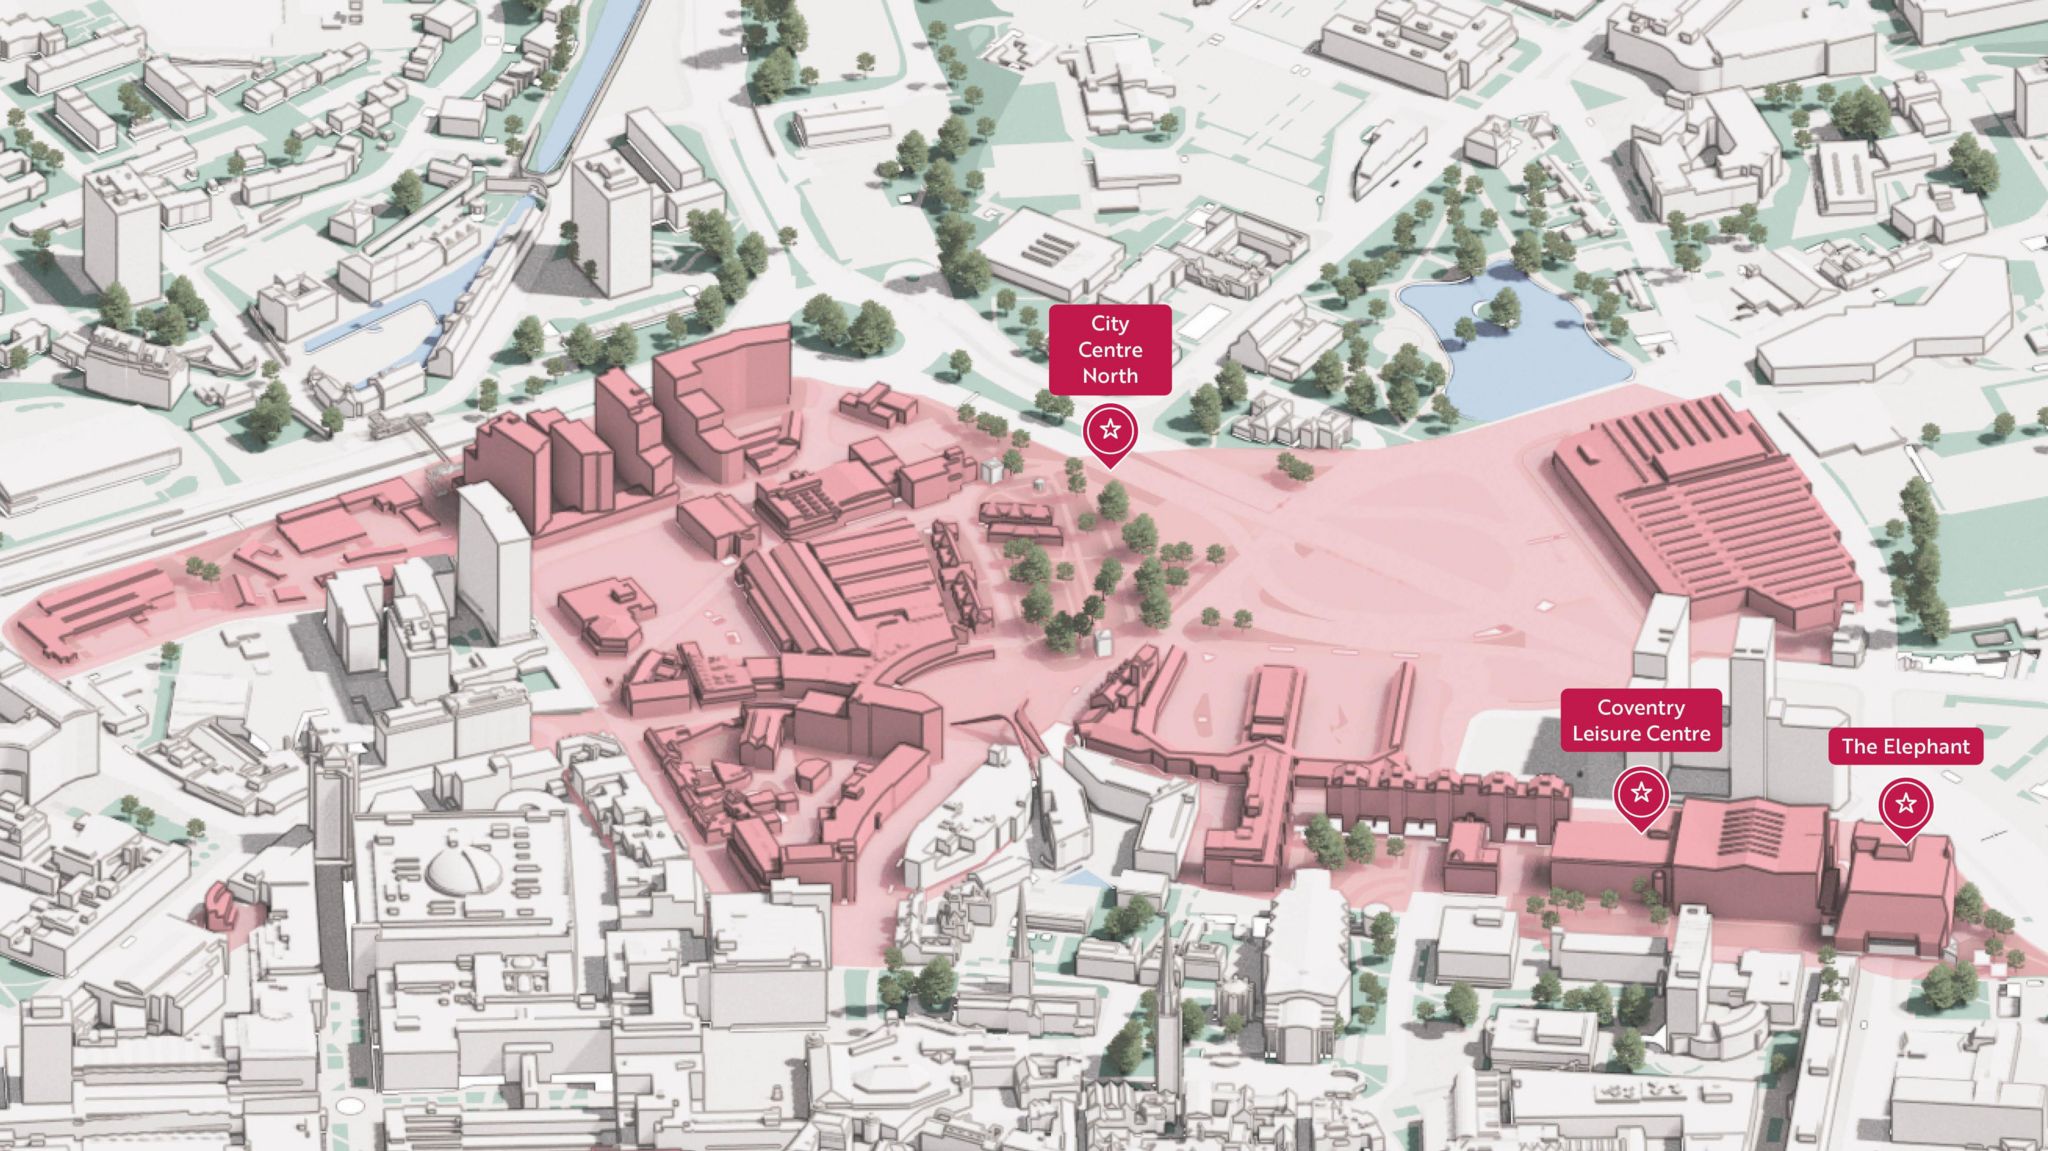 Map of the proposed regeneration scheme